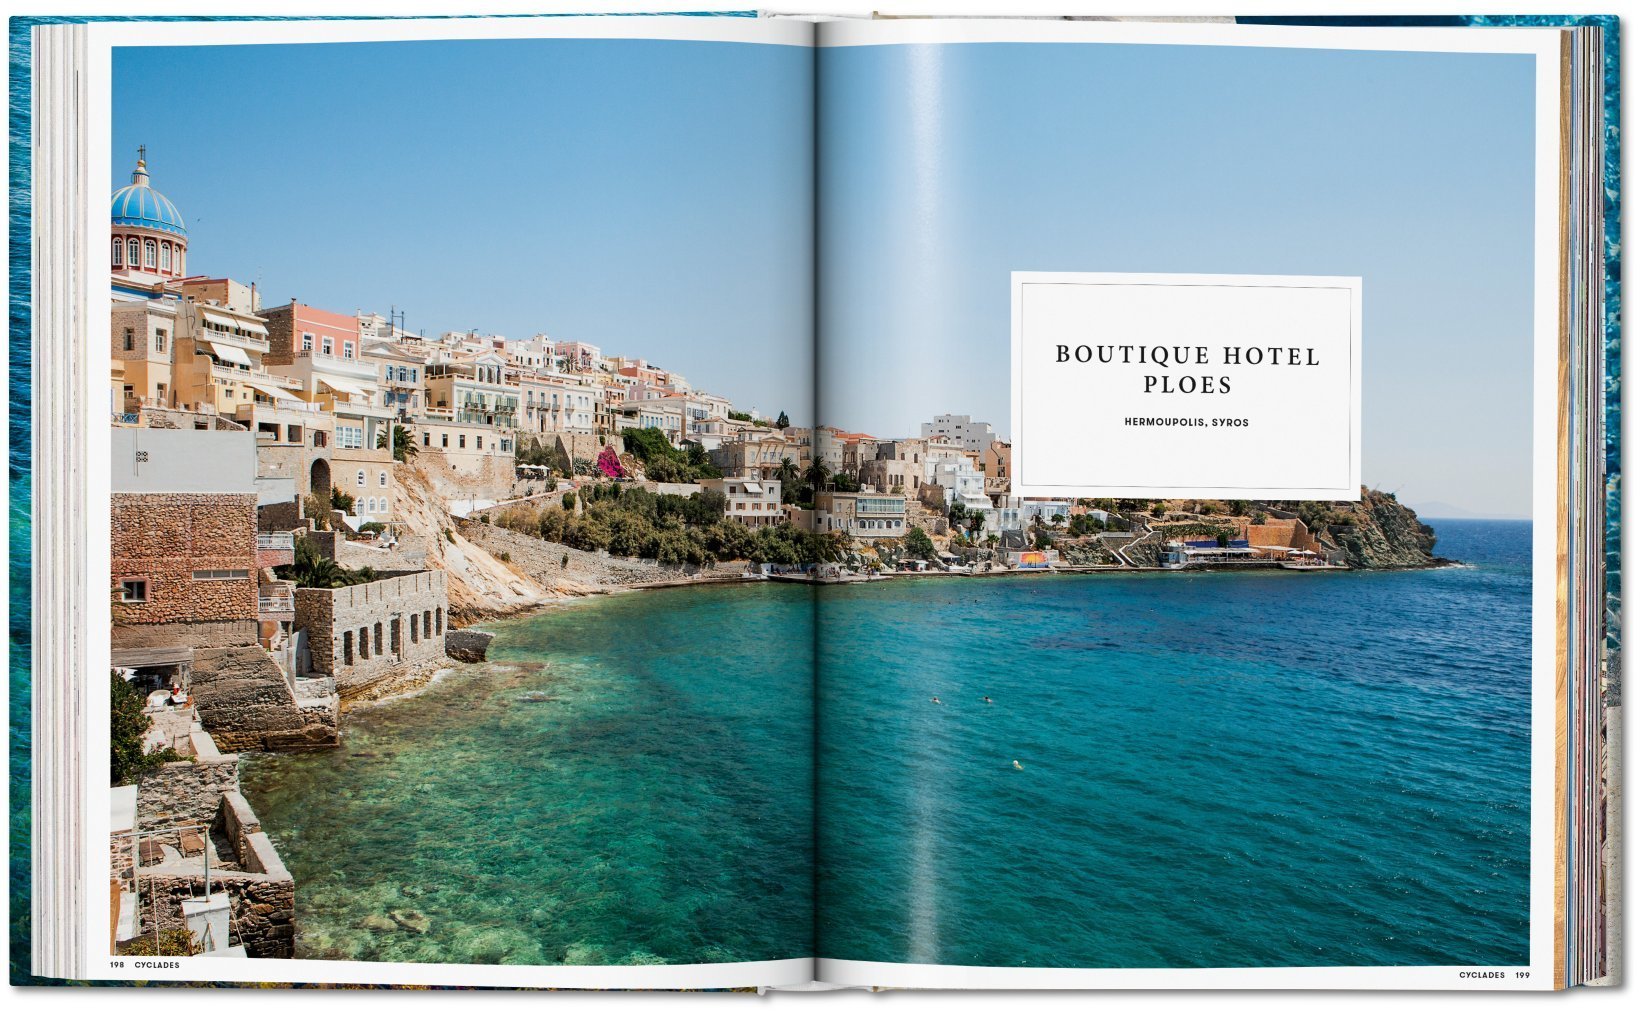 Taschen Great Escapes Greece. The Hotel Book